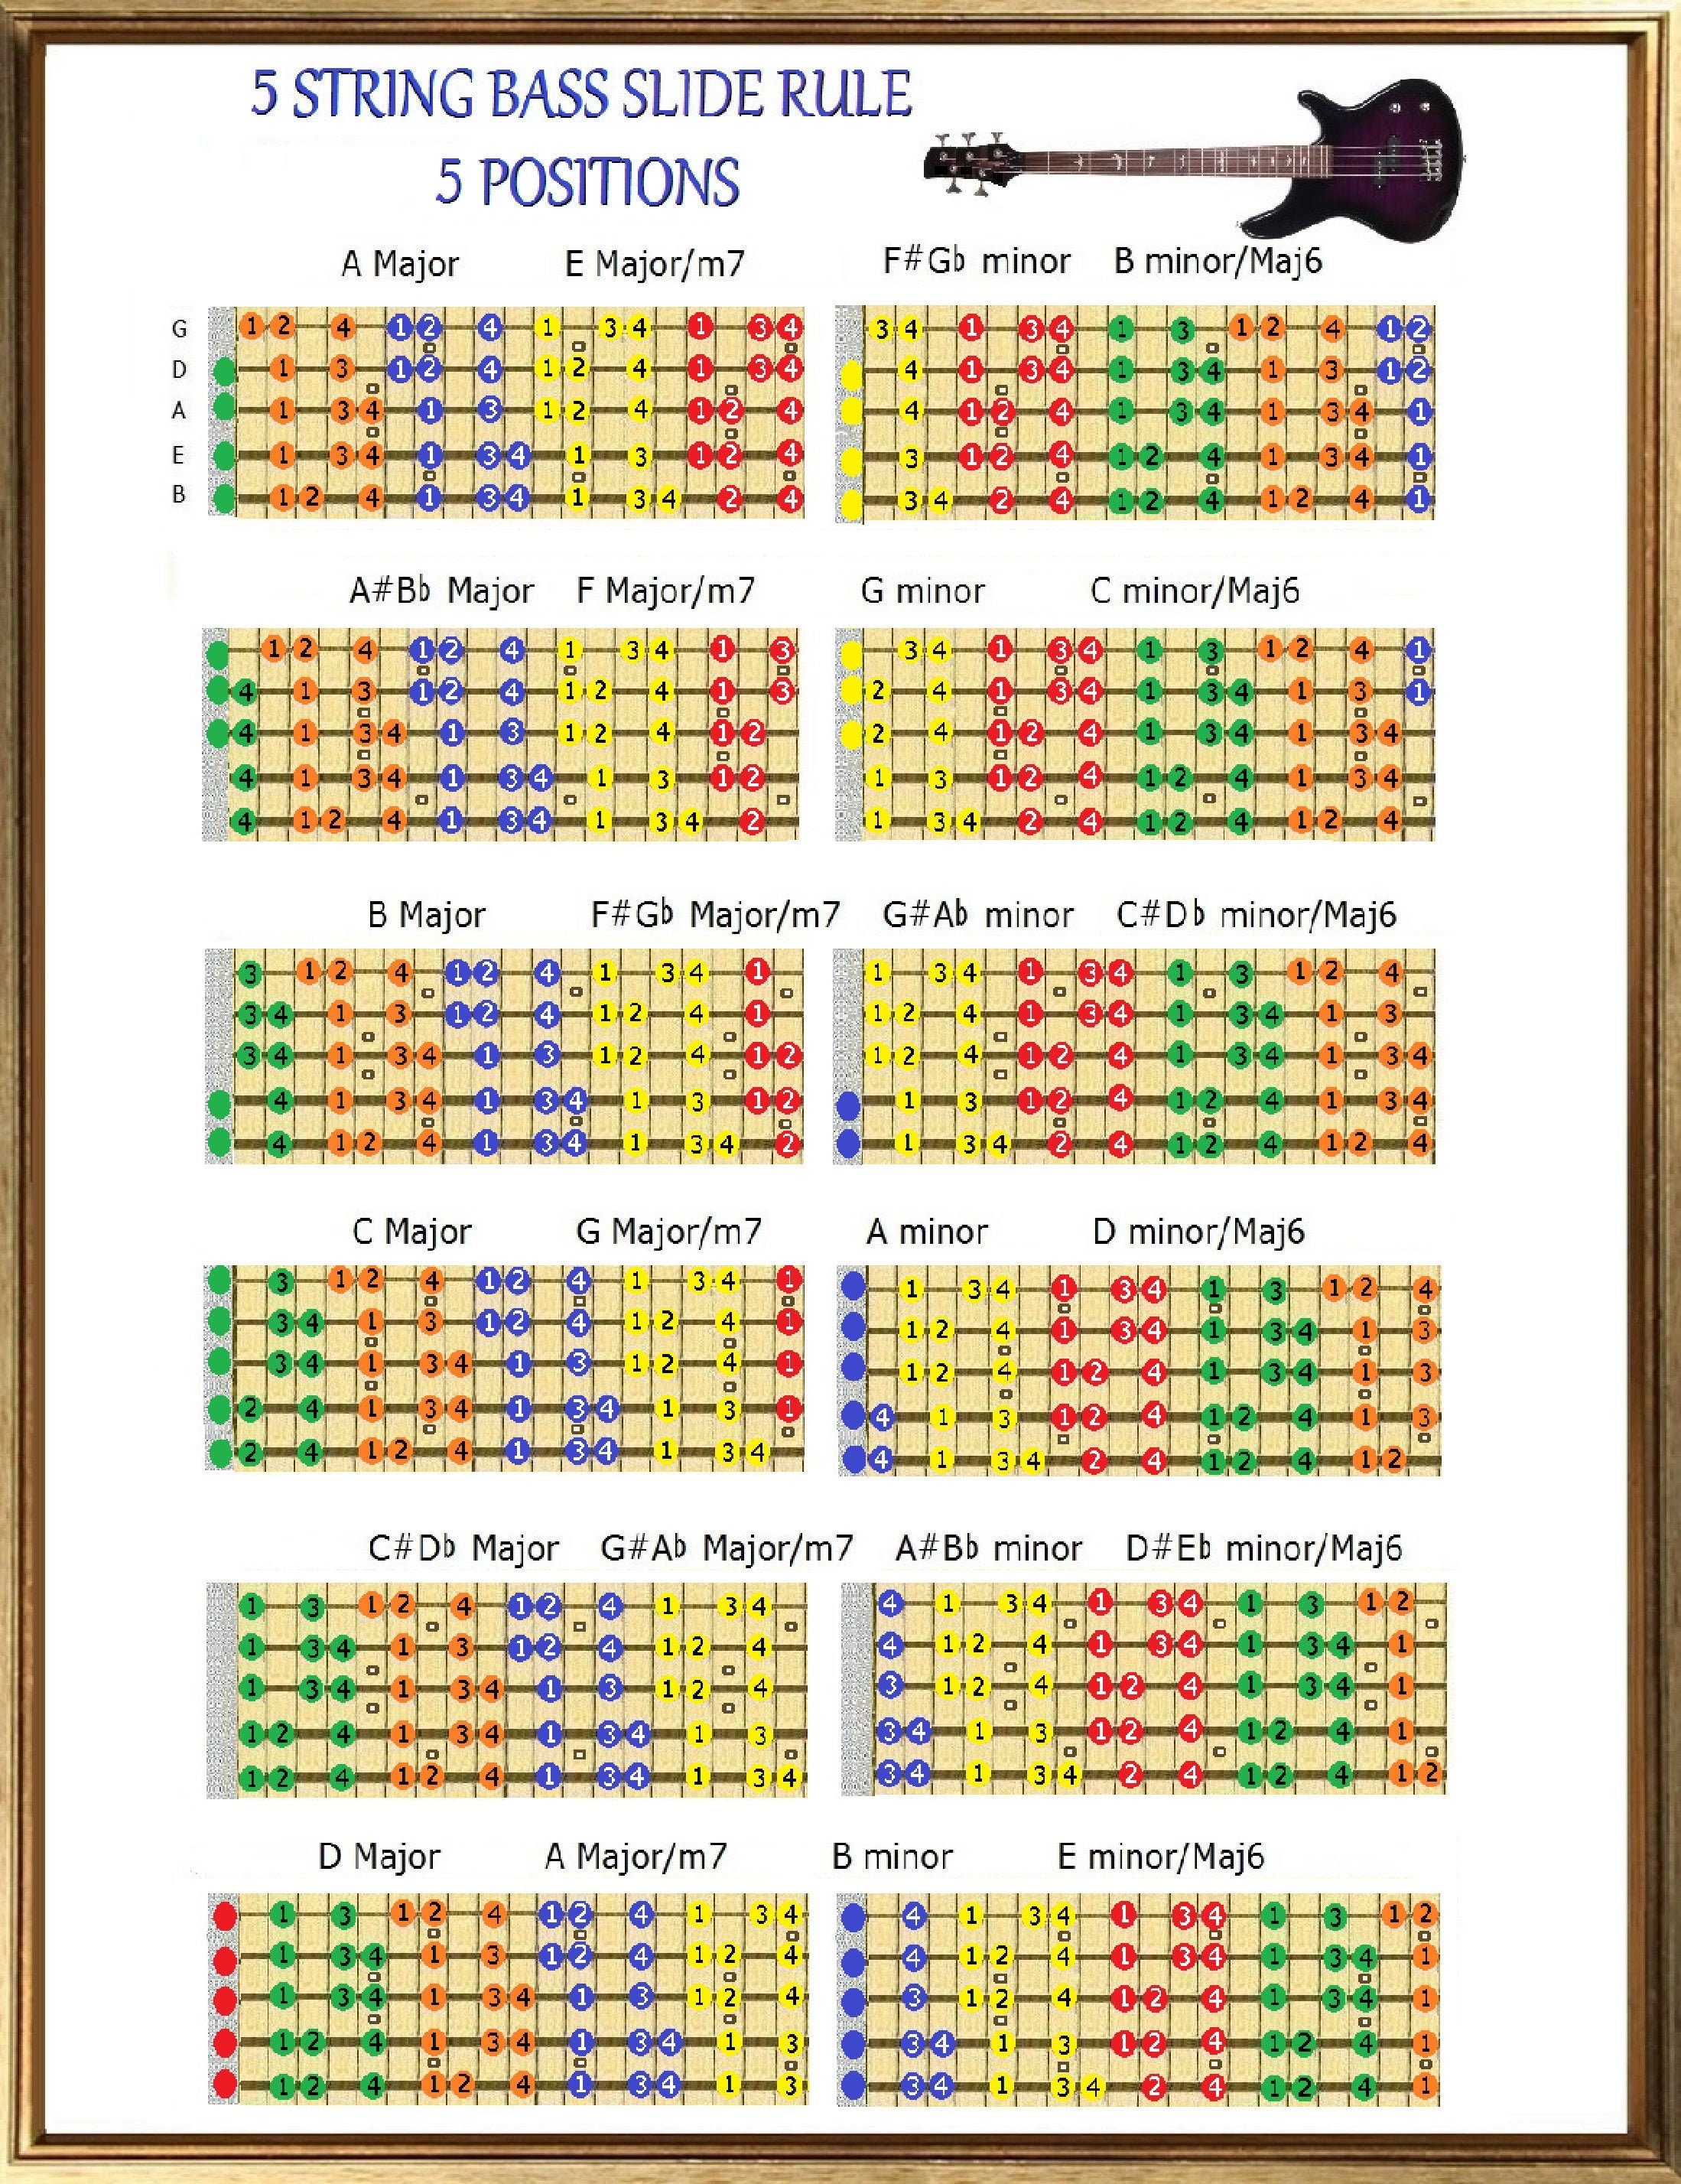 laminated-string-bass-fretboard-chart-poster-nashville-numbering-theory-11x17-beginner-easy